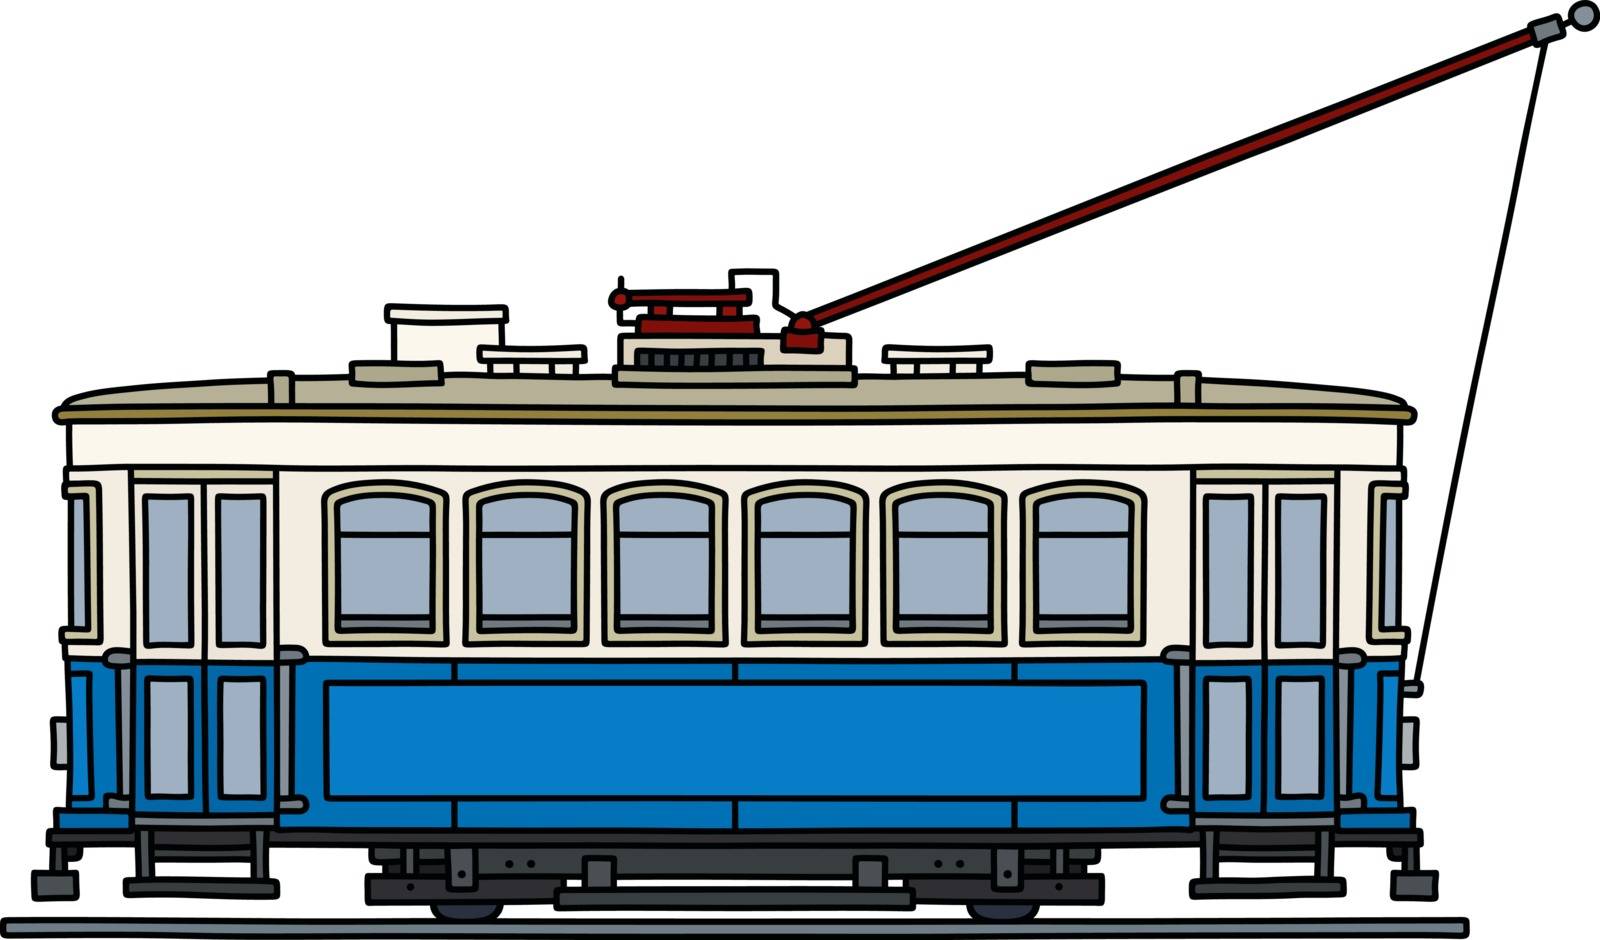 The classic blue tramway by vostal